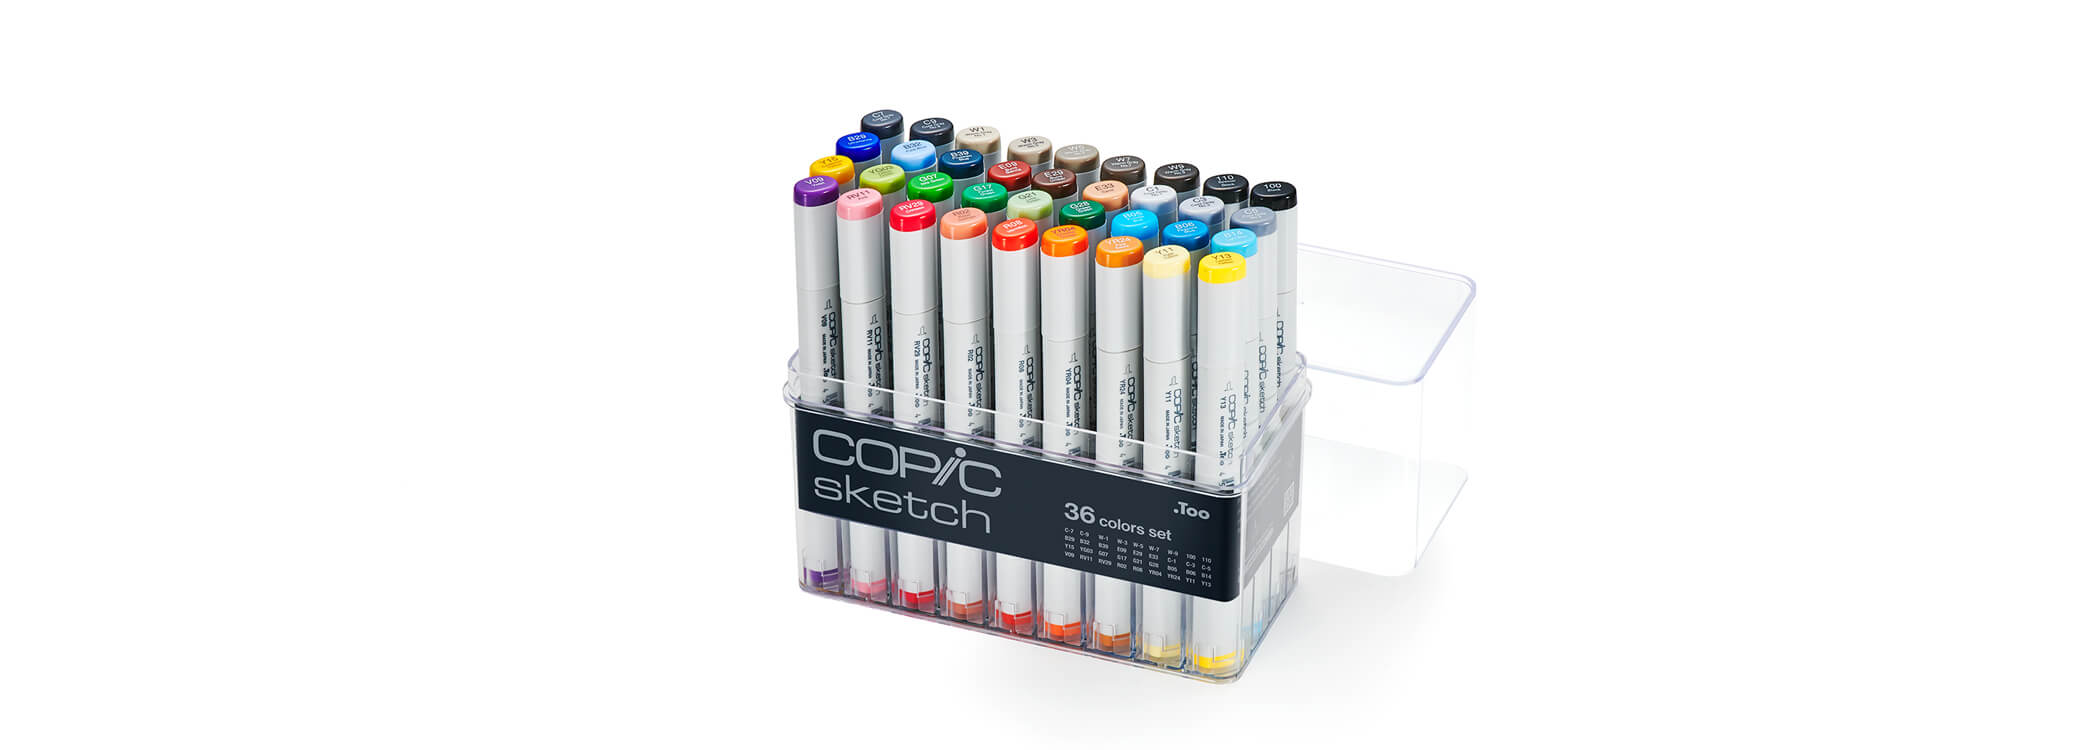 Copic Markers 36-Piece Sketch Basic Set SB36 Alcohol Ink Professional Markers 